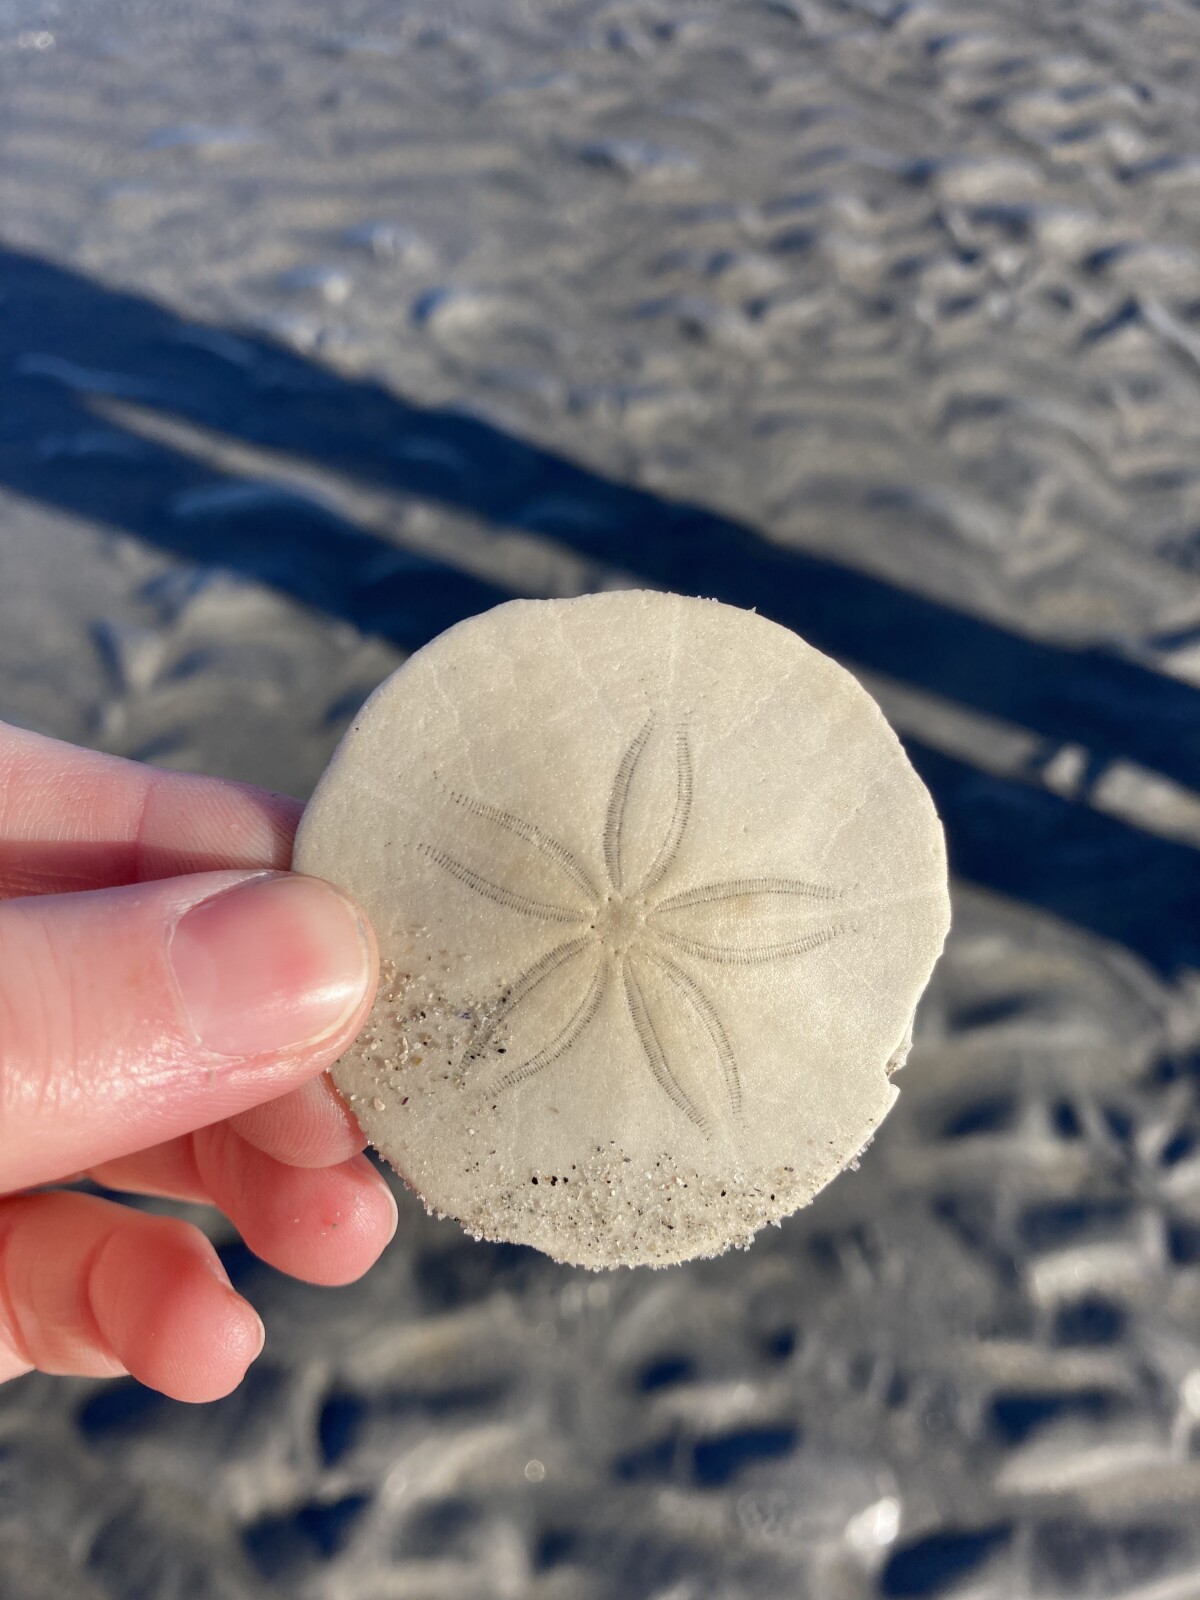 Are you like a sand dollar? 